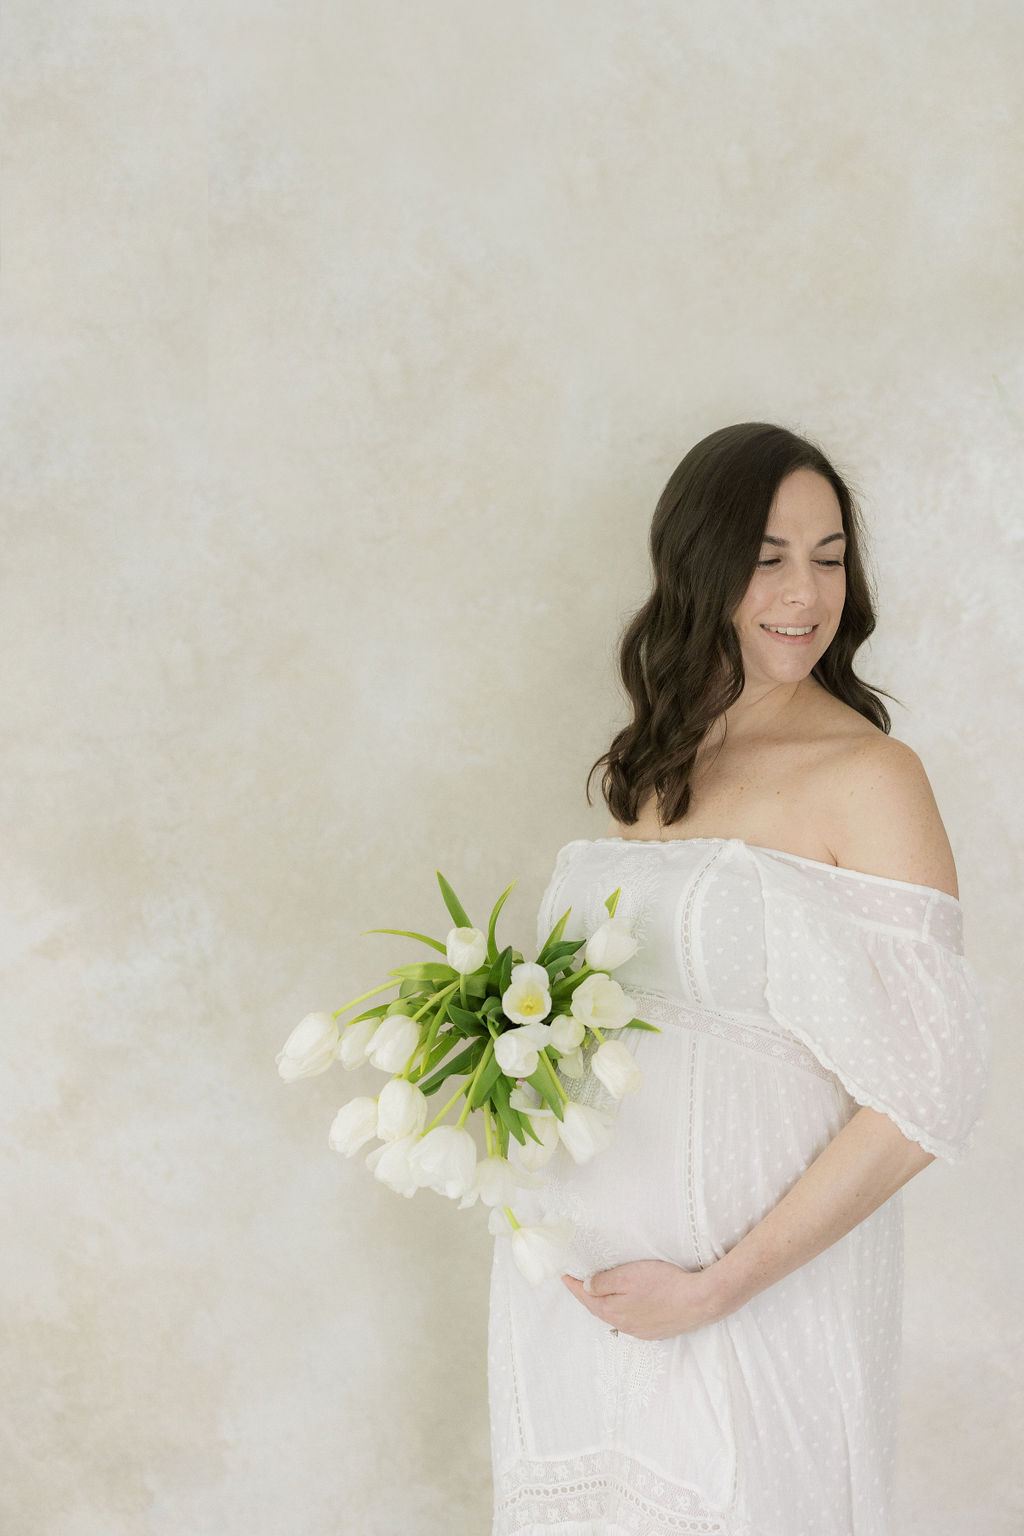 A mom to be stands in a studio holding a bouquet of white tulips in a white maternity gown nj baby shower venues